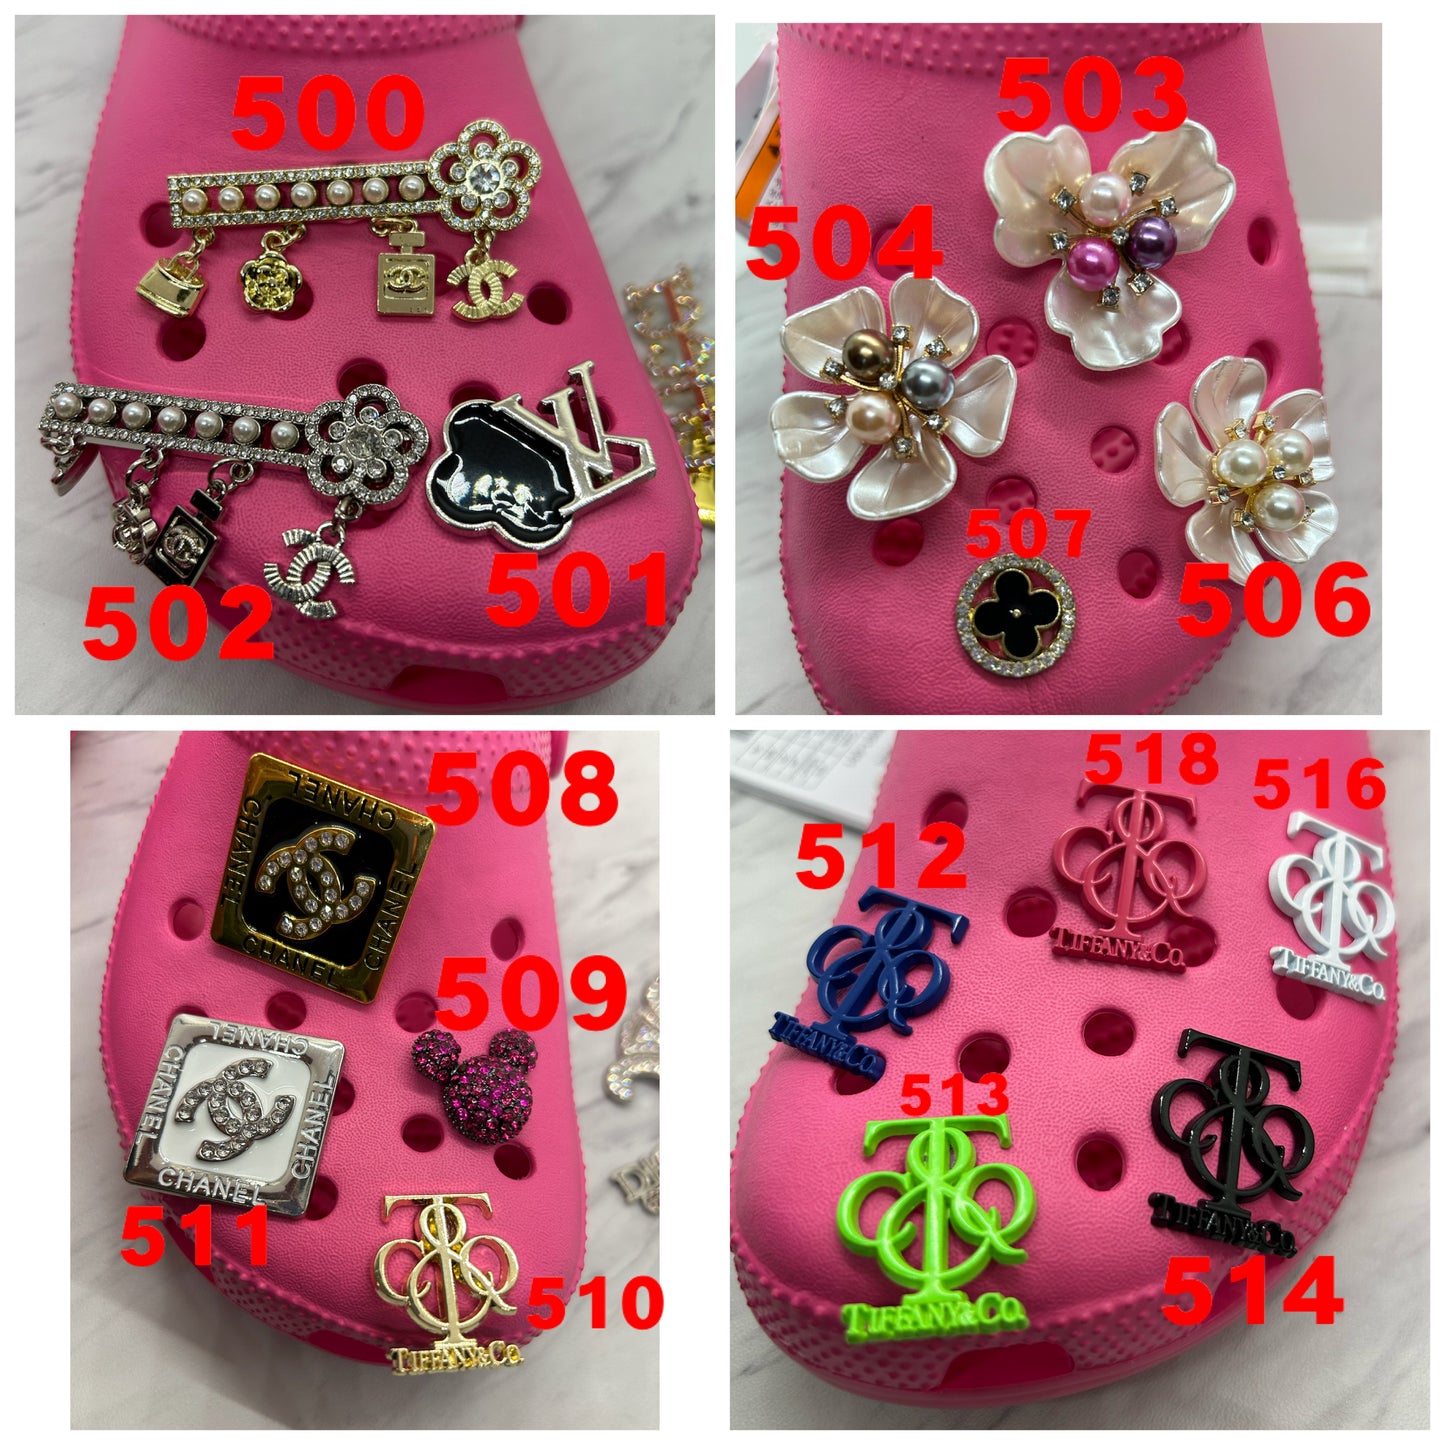 From 500 Pretty Bling Bling charms